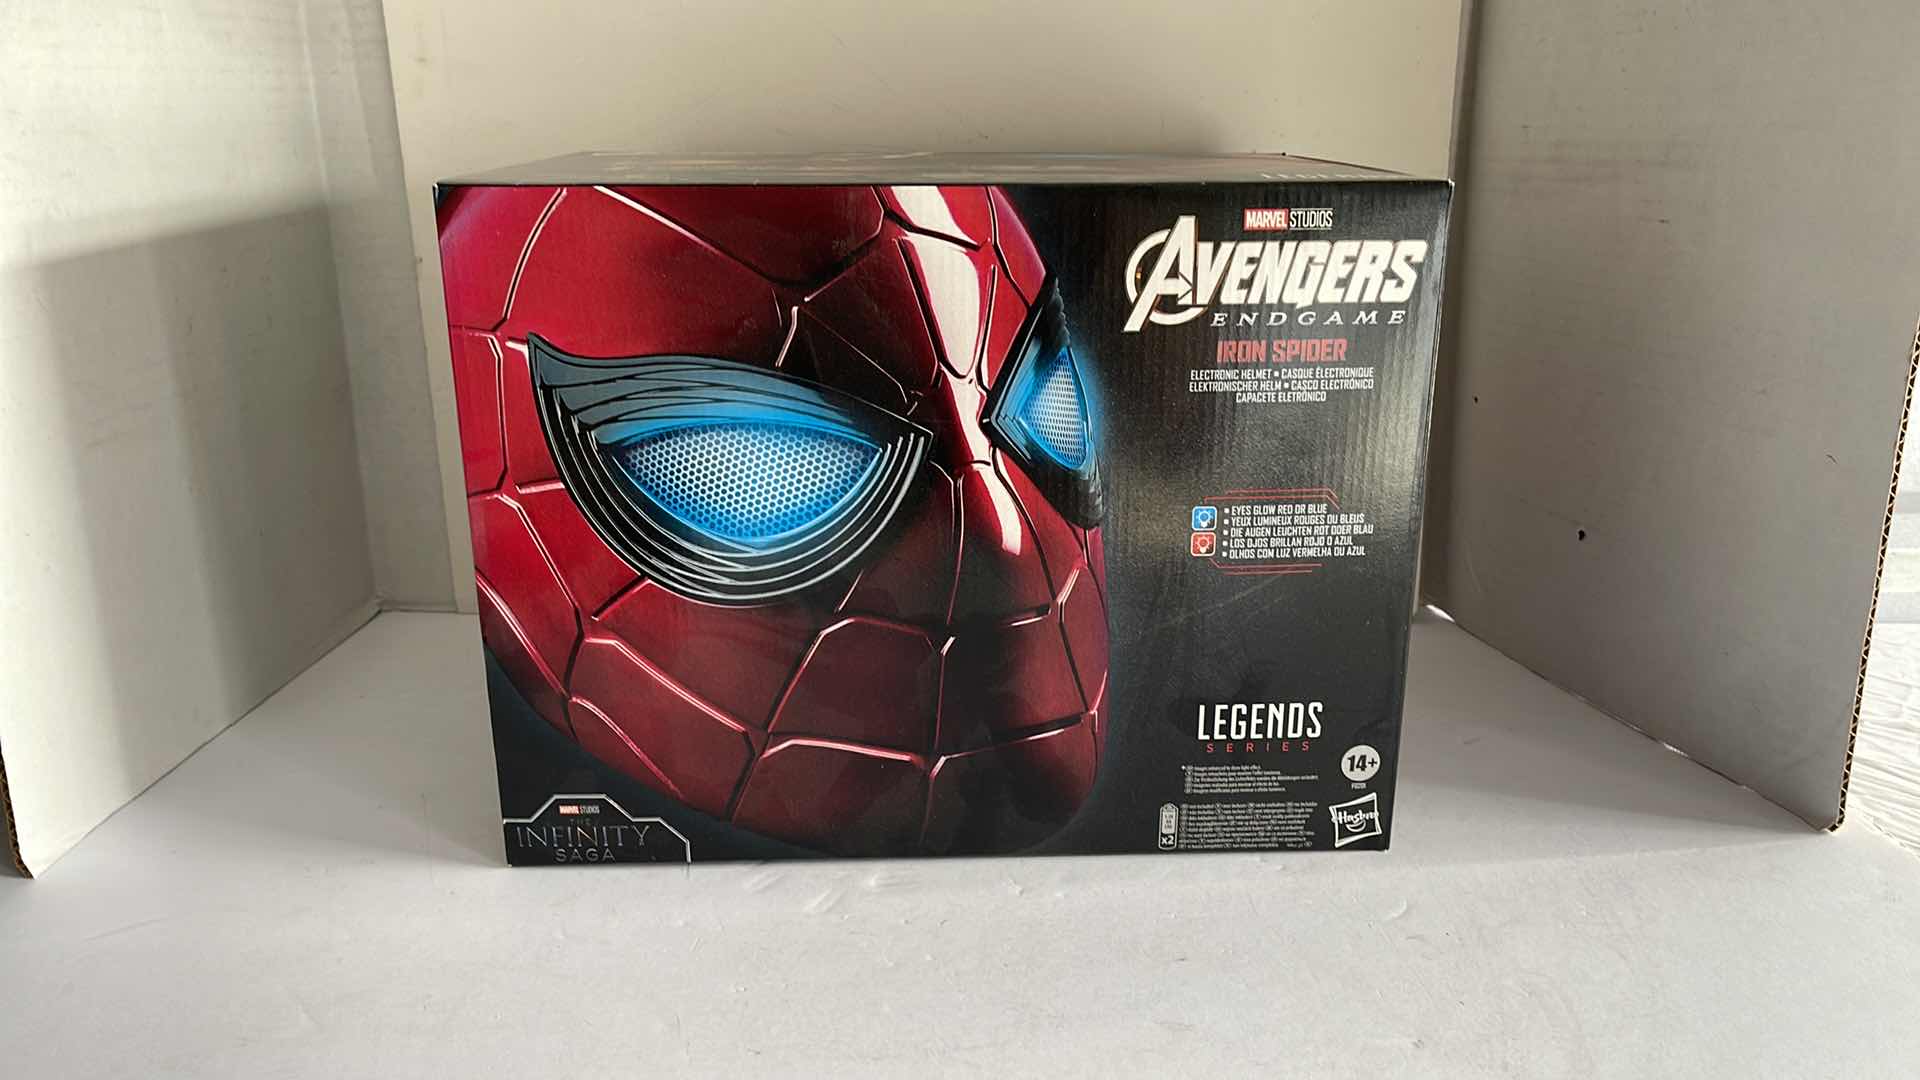 Photo 1 of NIB MARVEL STUDIOS AVENGERS END GAME LEGENDS SERIES IRON SPIDER MSRP $139.99